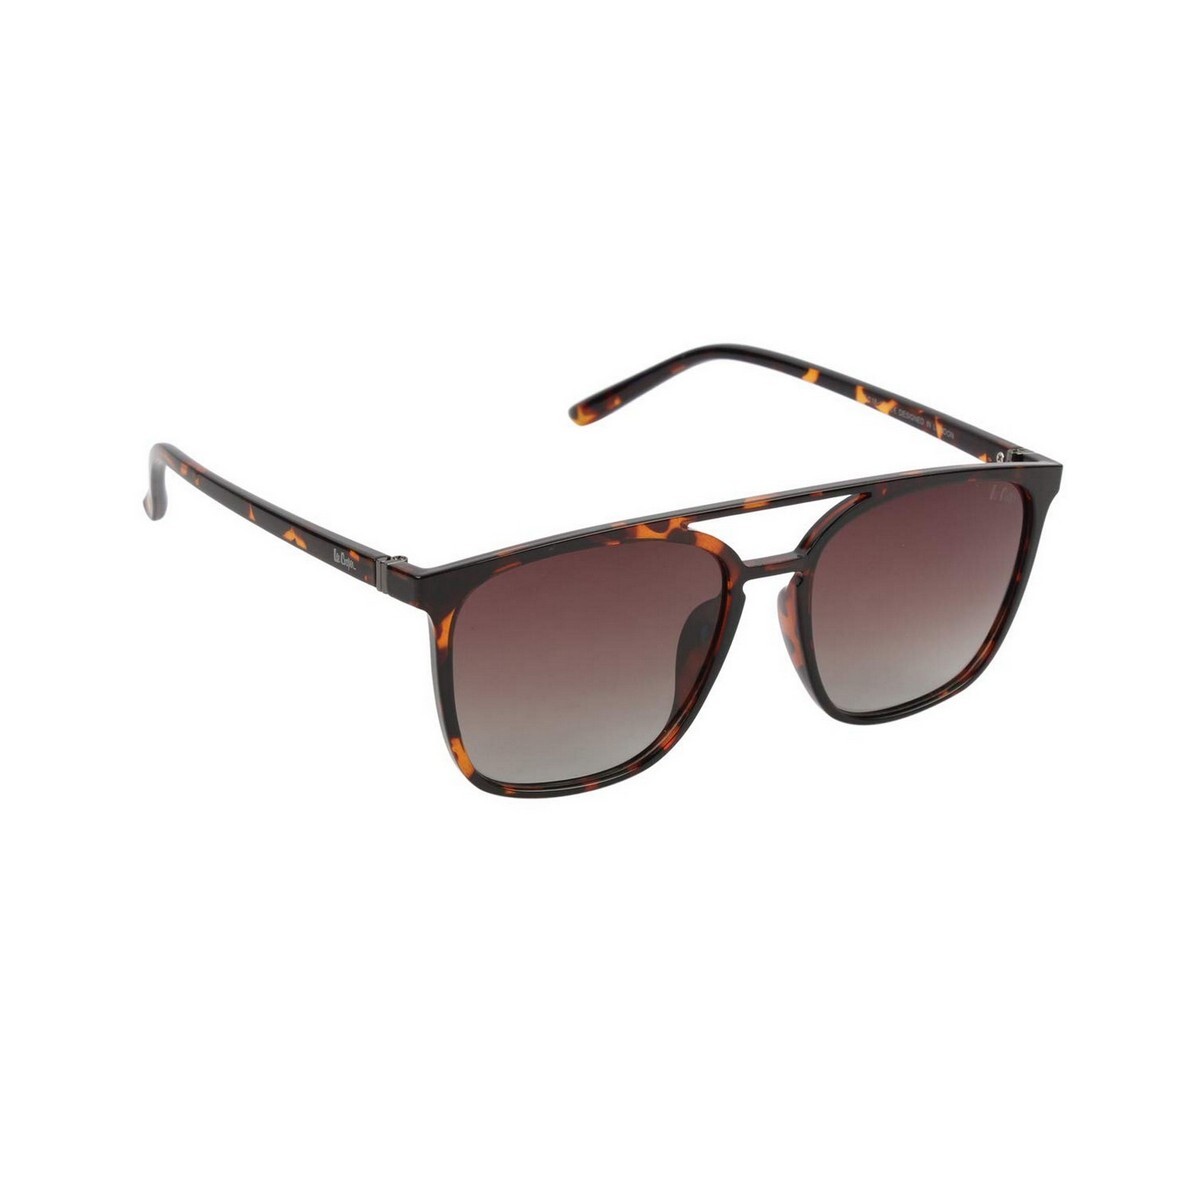 Lee Cooper Male Brown Frame With Brown Lens Sunglass